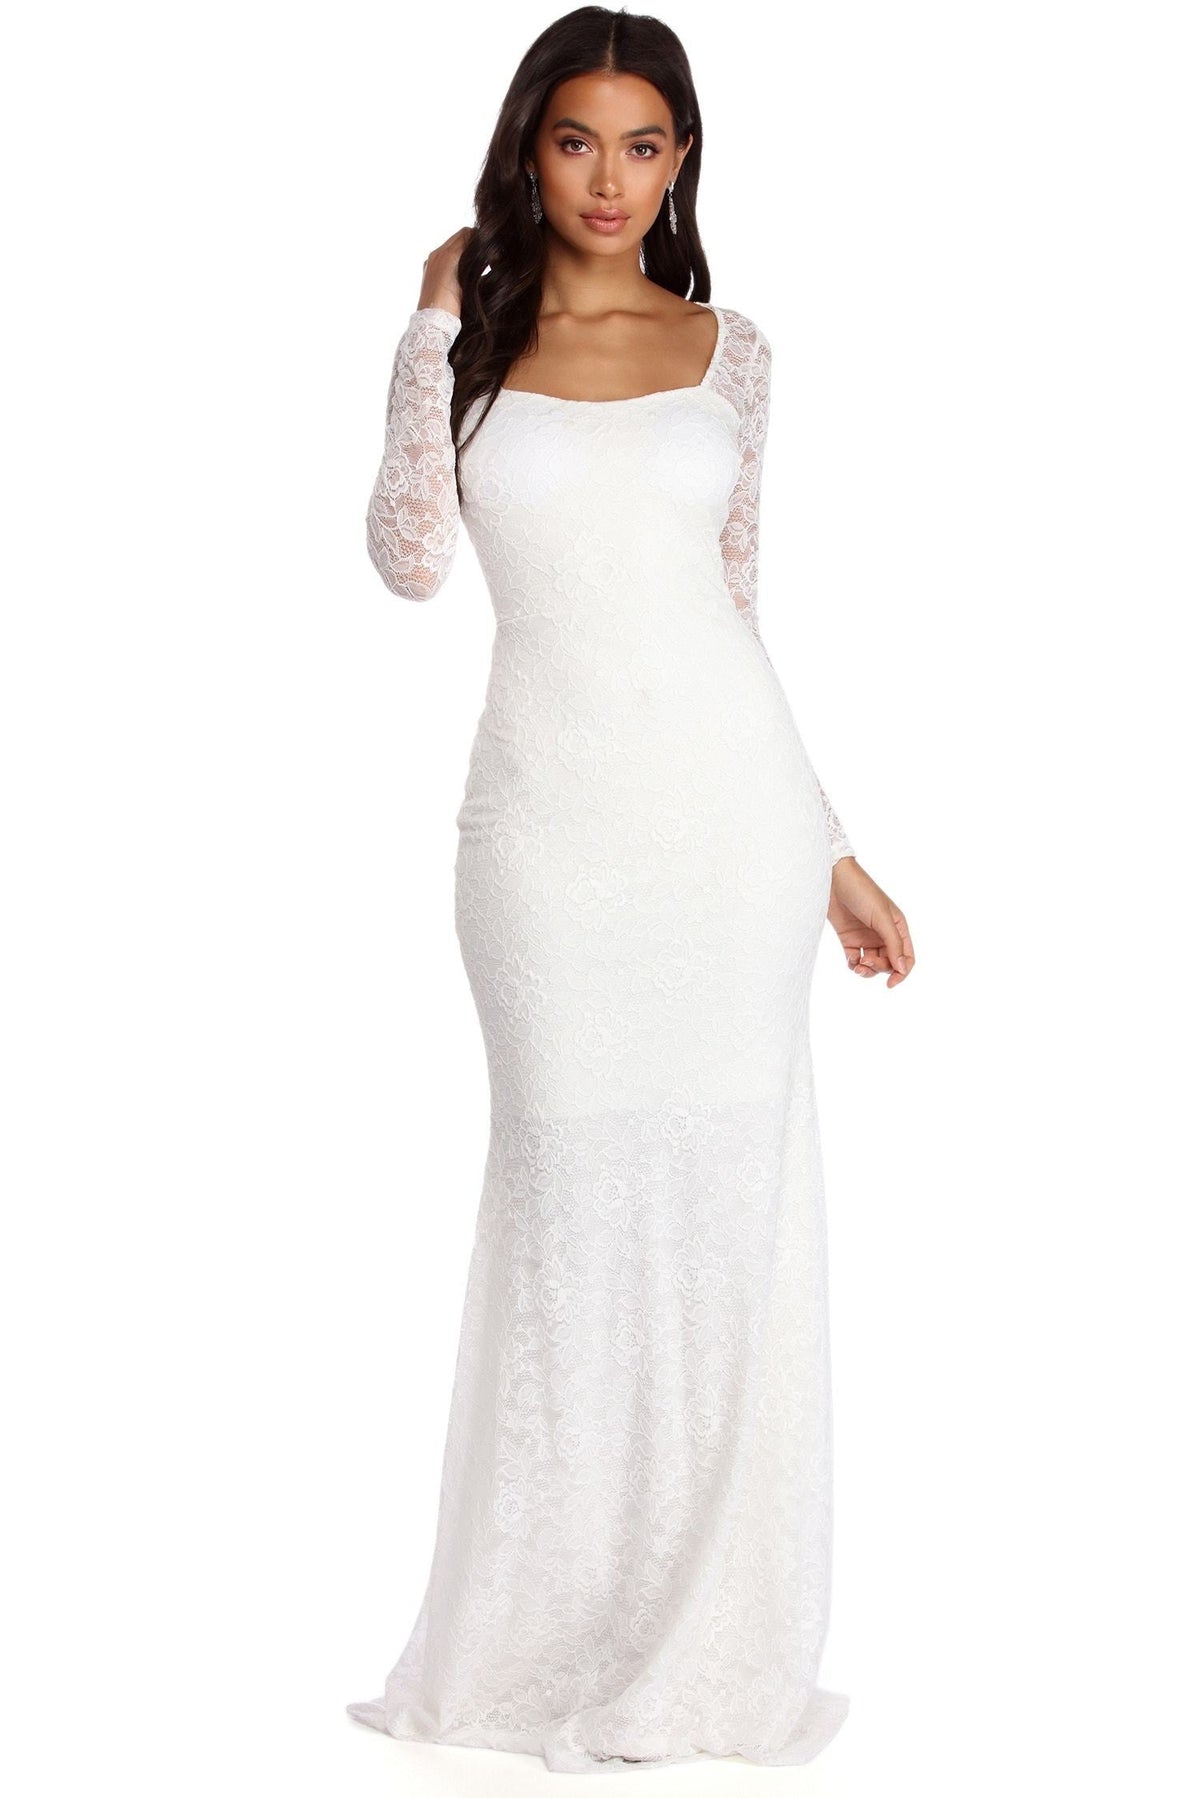 Delilah Illusion Lace Formal Dress - Lady Occasions